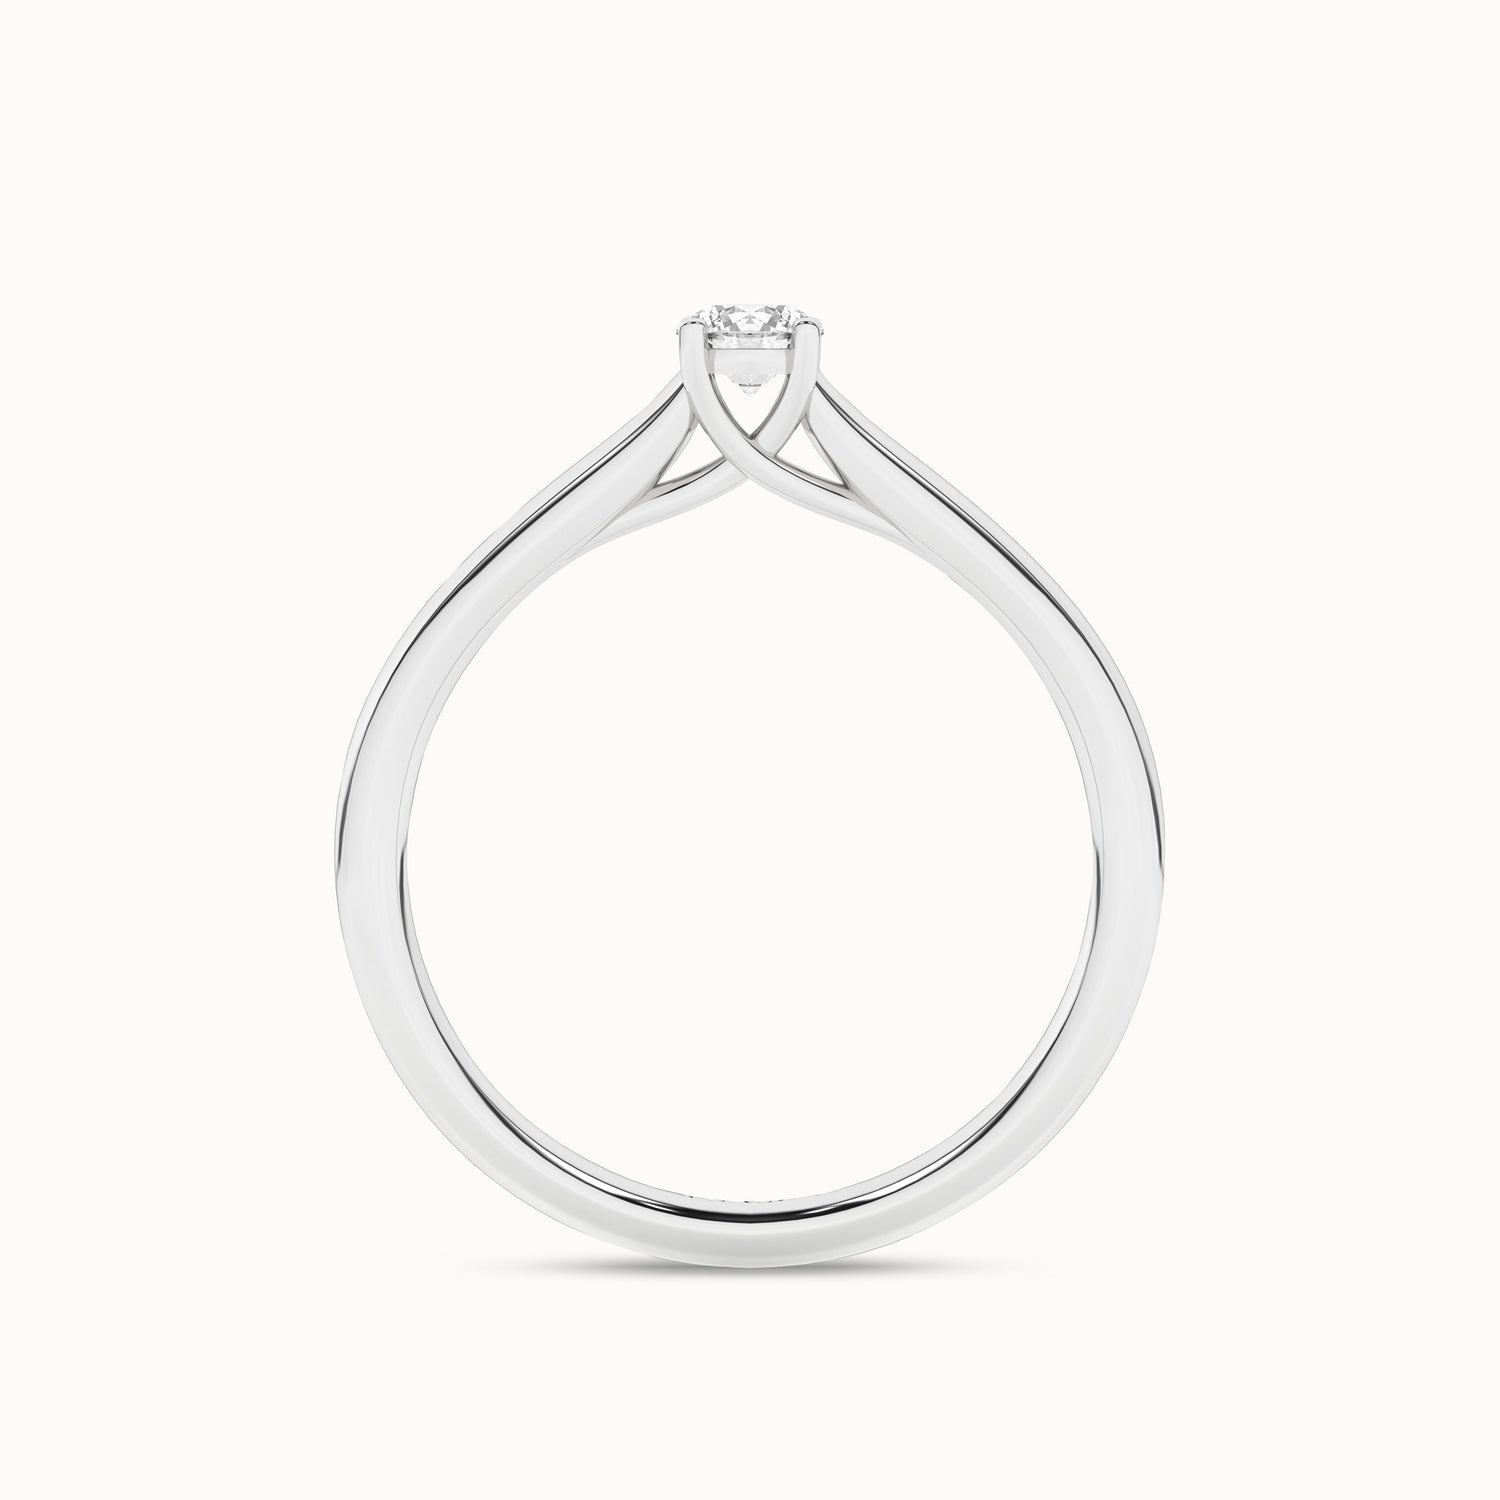 Timeless Round Ring_Product Angle_1/6Ct - 2